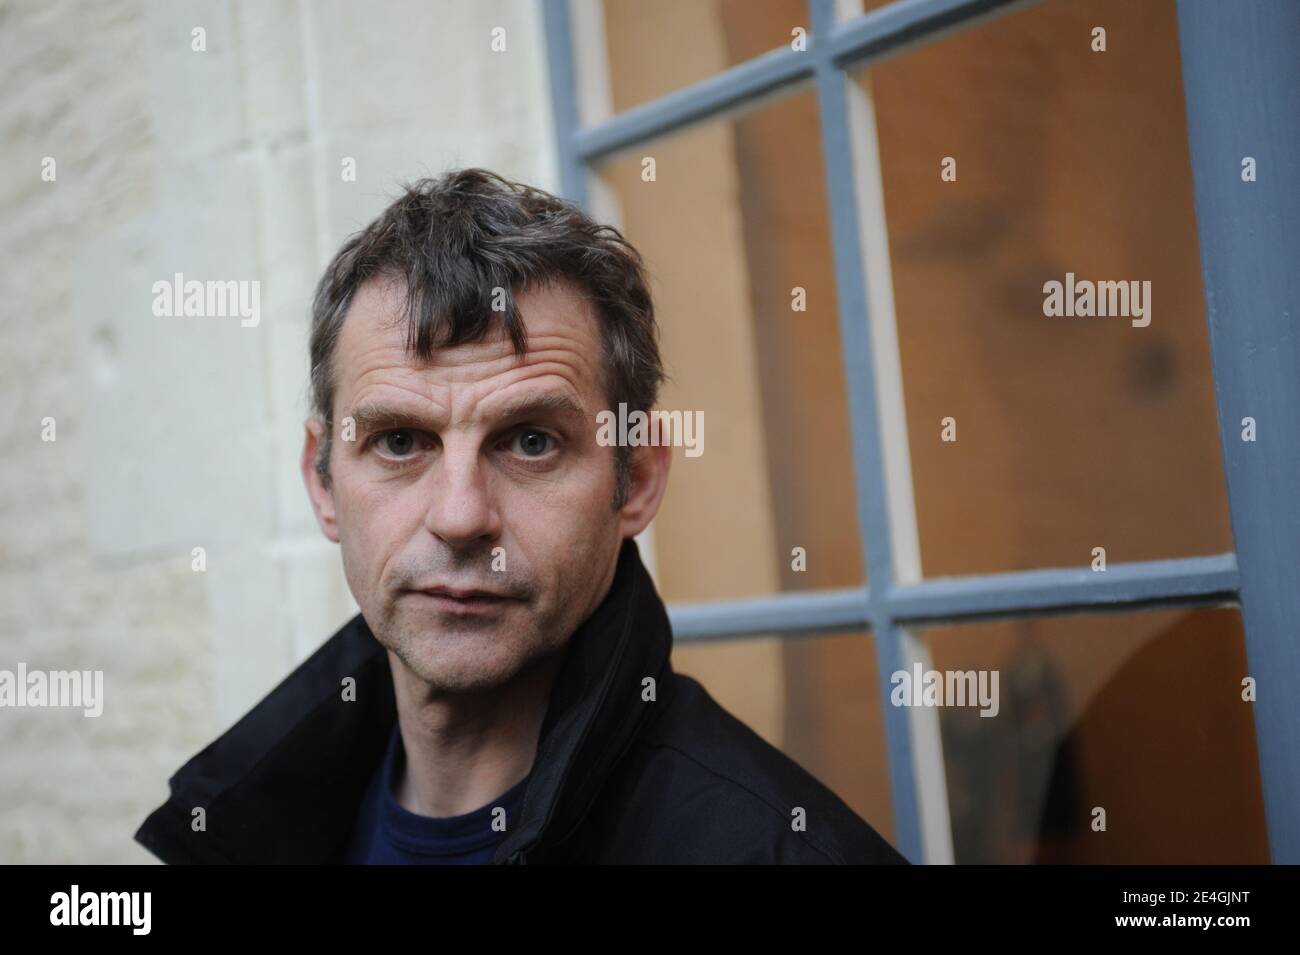 French director Lucas Belvaux during a photocall to present his last movie 'Rapt', in Lille, North of France on November 13, 2009. Photo by Farid Alouache/ABACAPRESS.COM Stock Photo